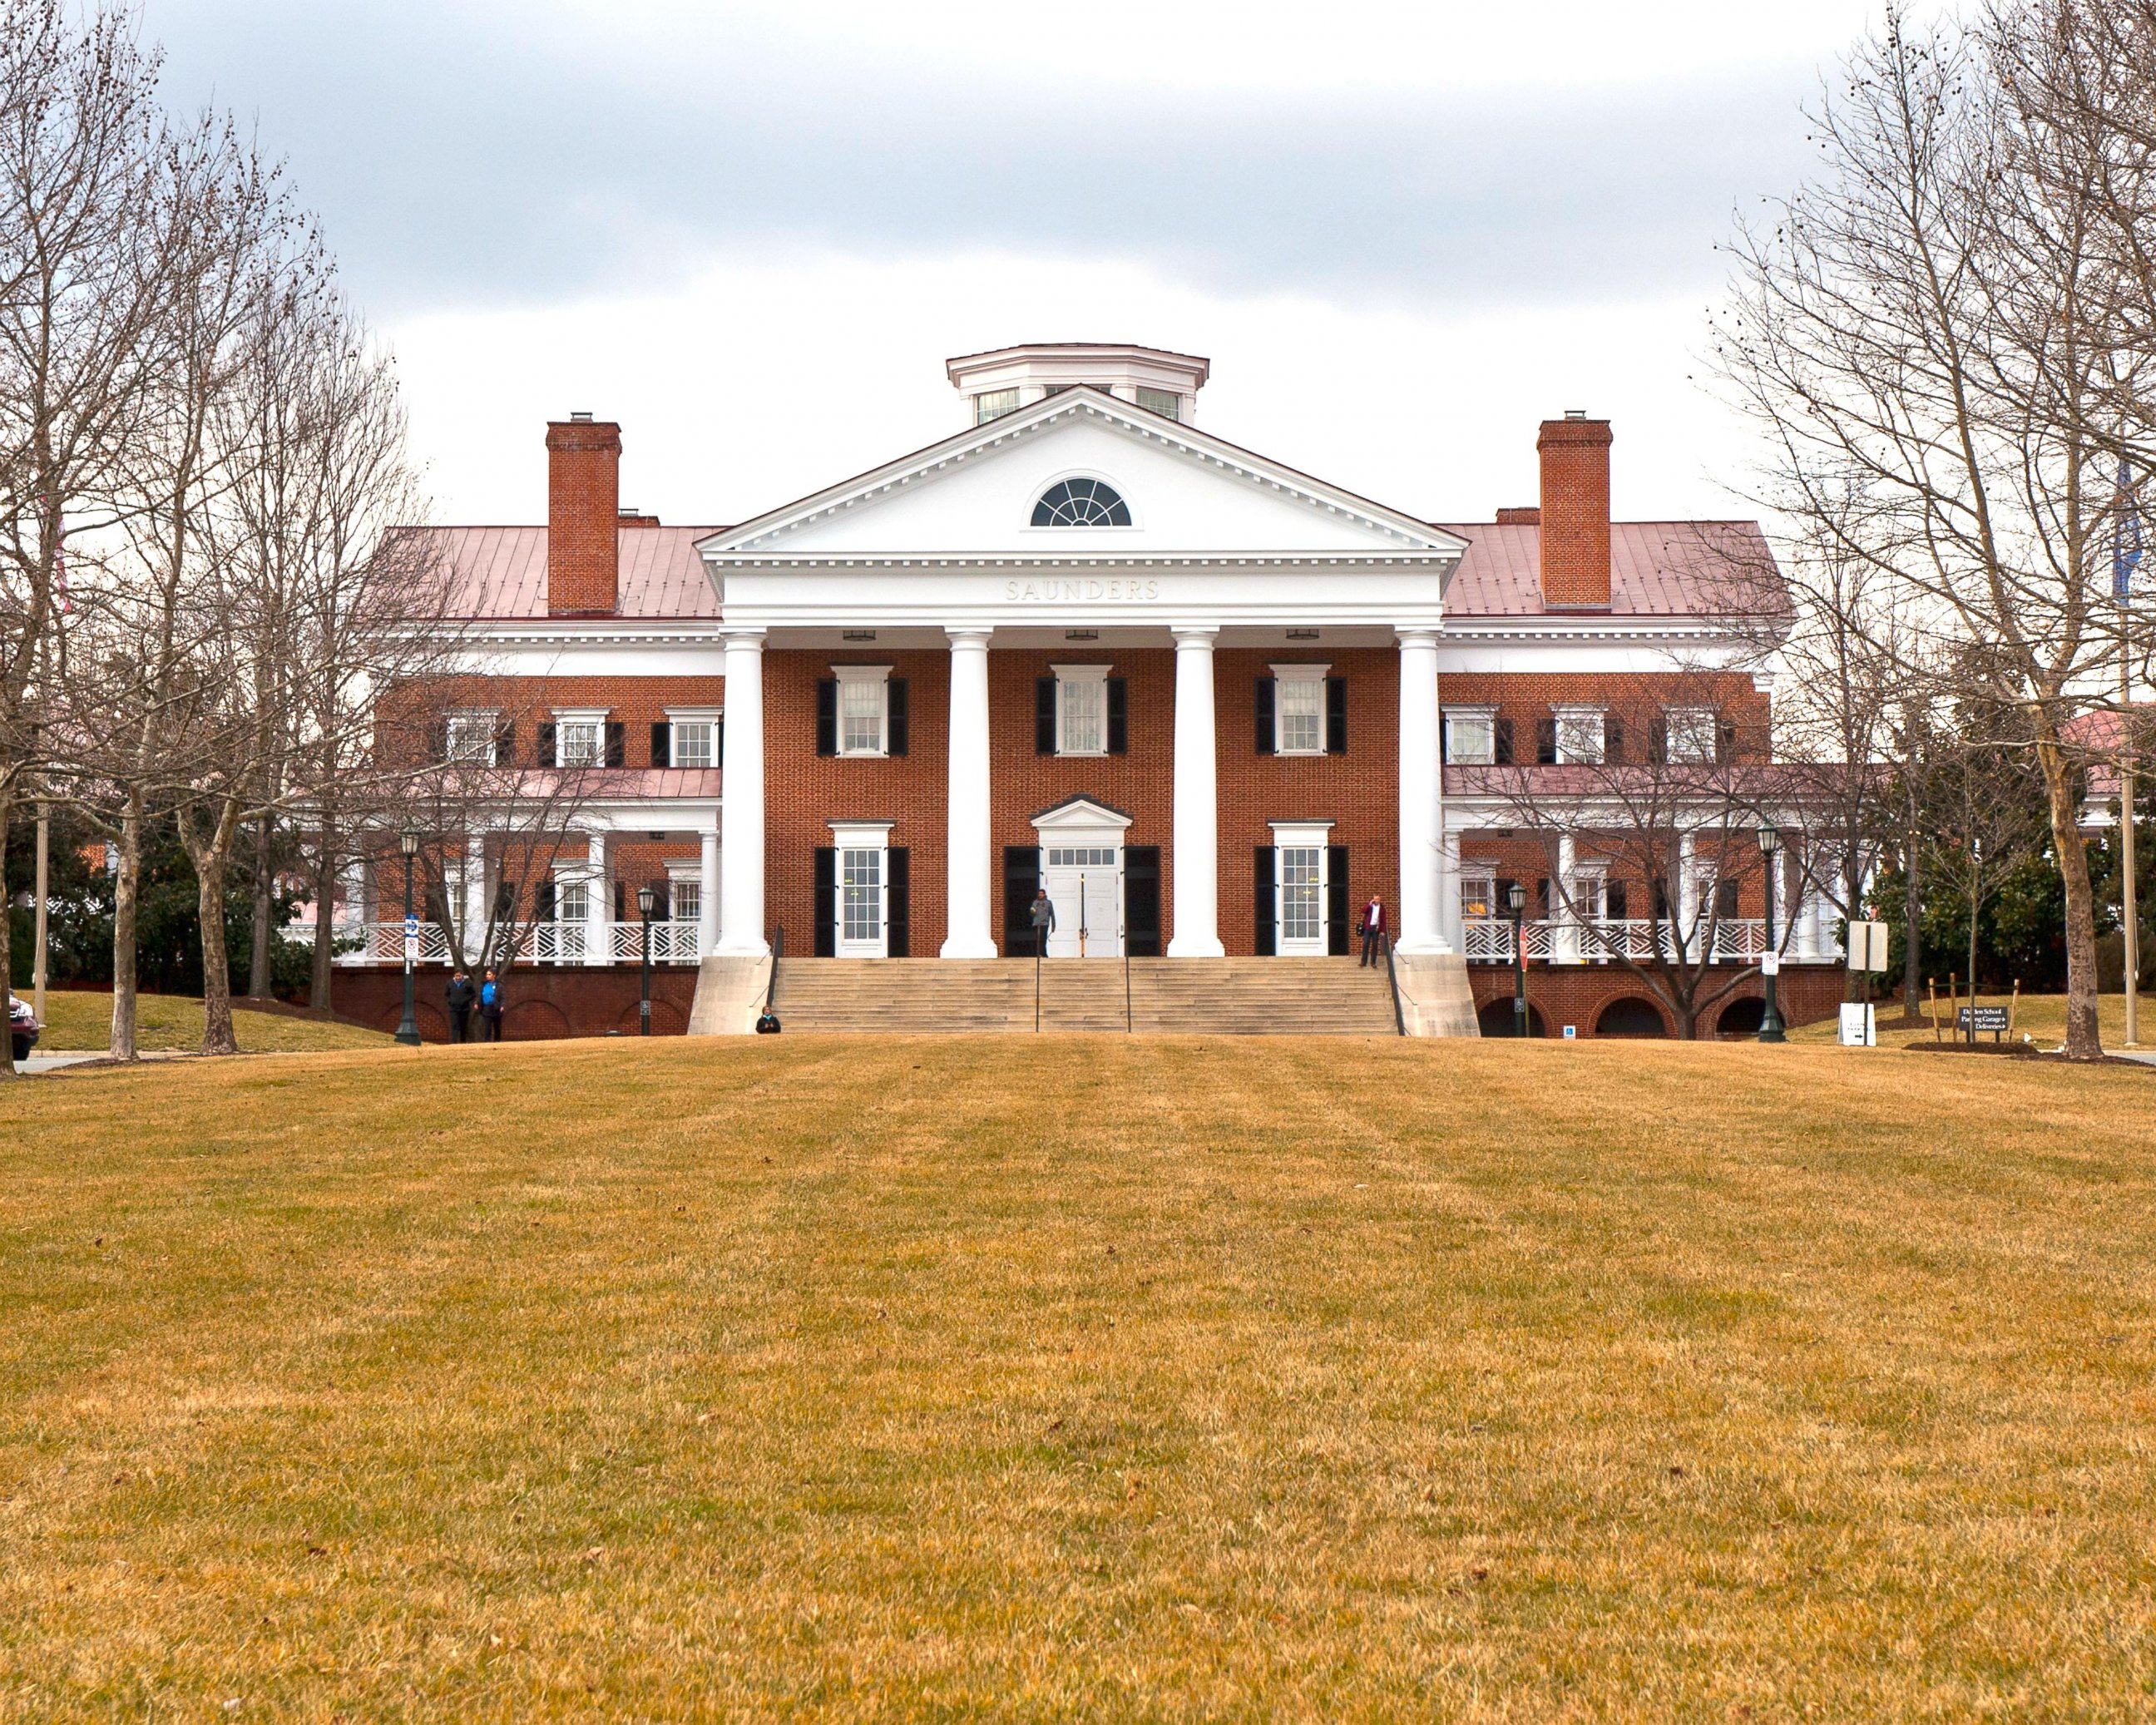 PHOTO: A view of Saunders Hall on campus at the University of Virginia on Feb. 28, 2013 in Charlottesville, Virginia.